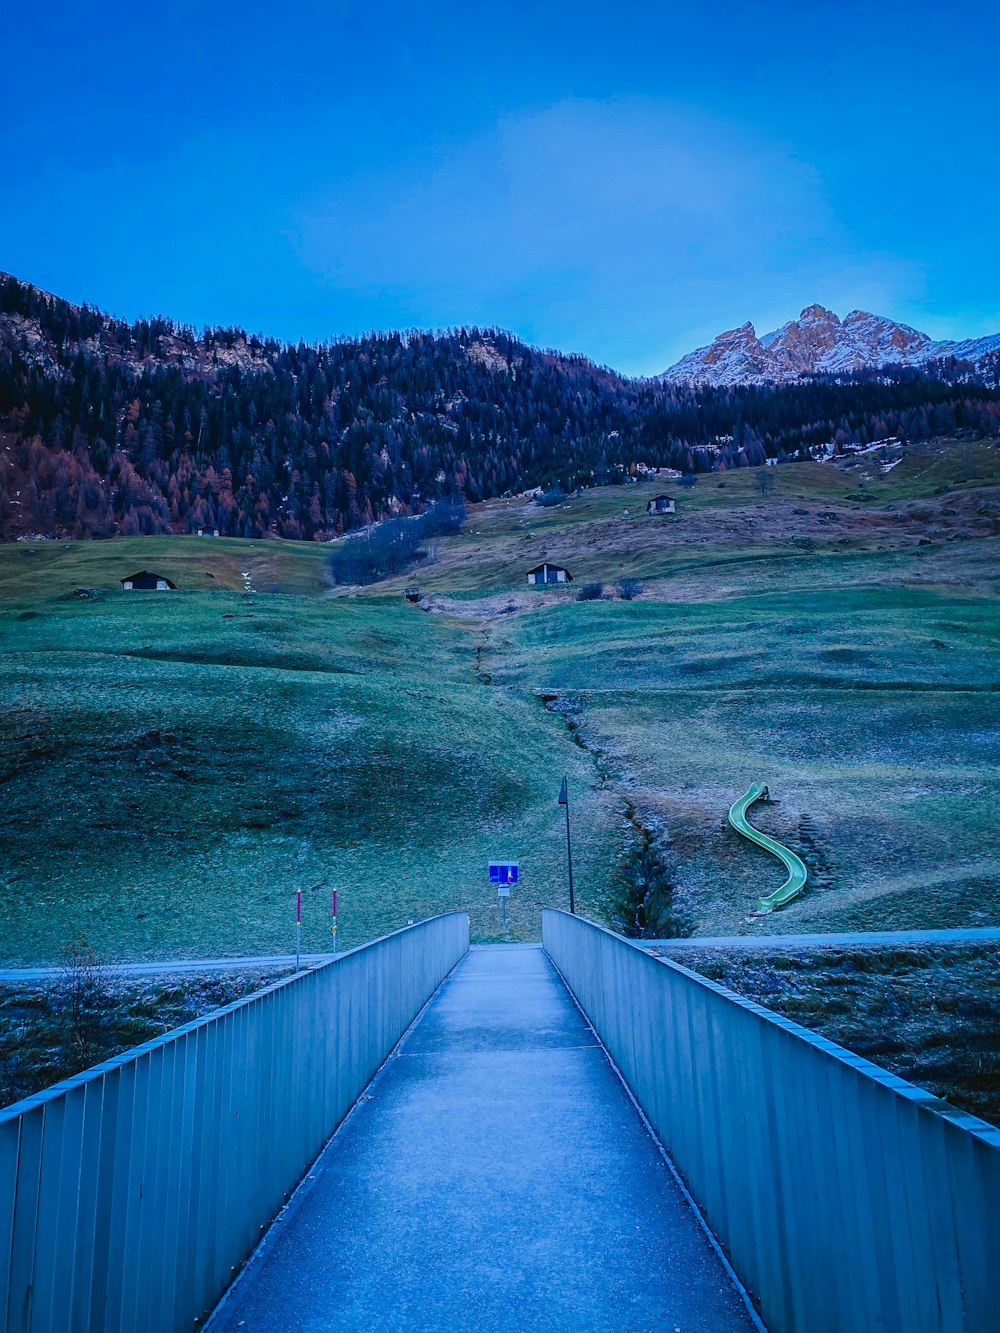 a walkway leading to a grassy field with mountains in the background